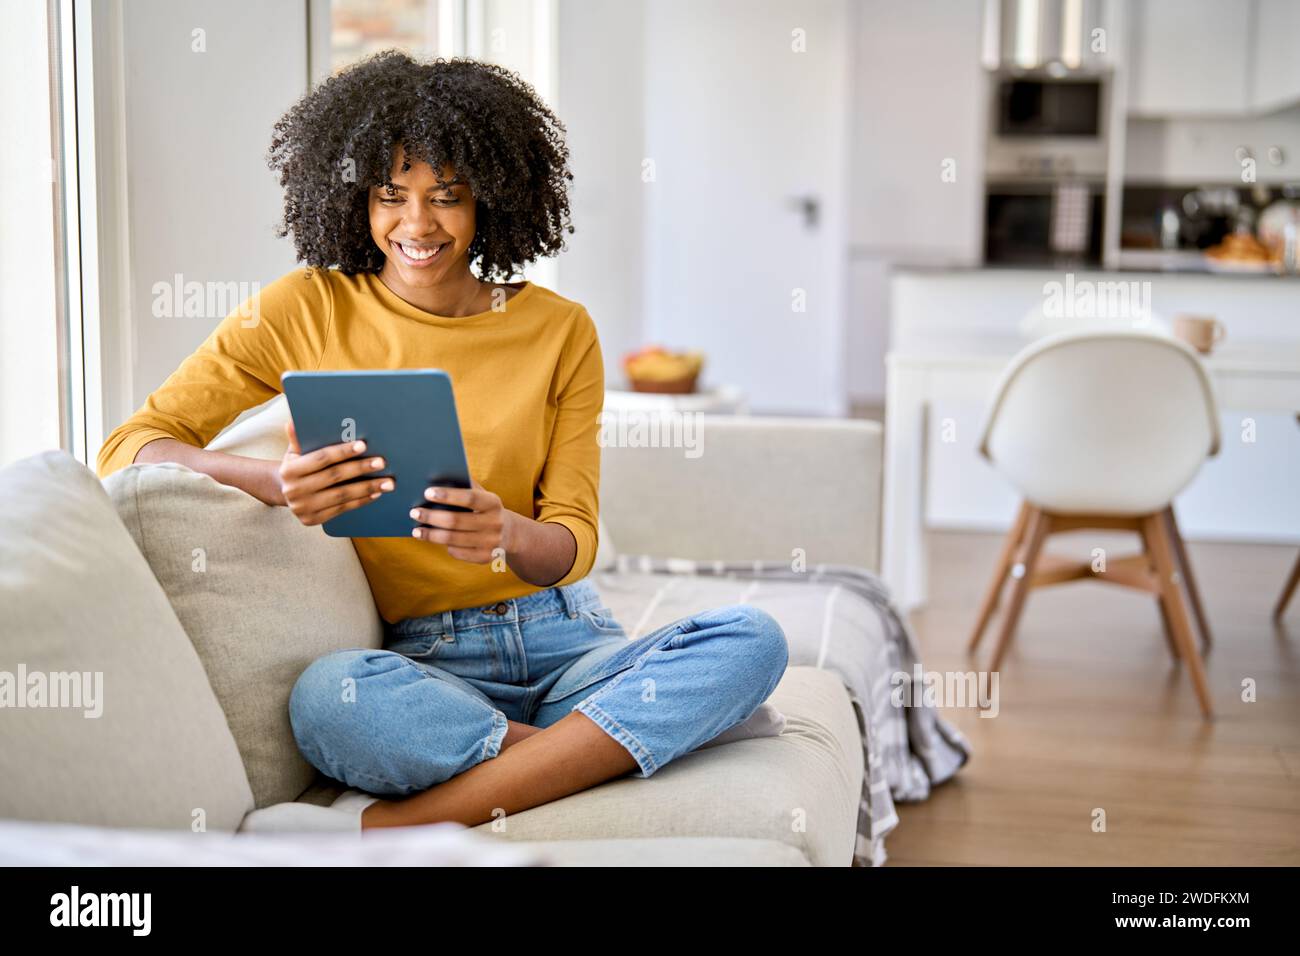 Happy young African American woman sitting on sofa at home using digital tablet. Stock Photo